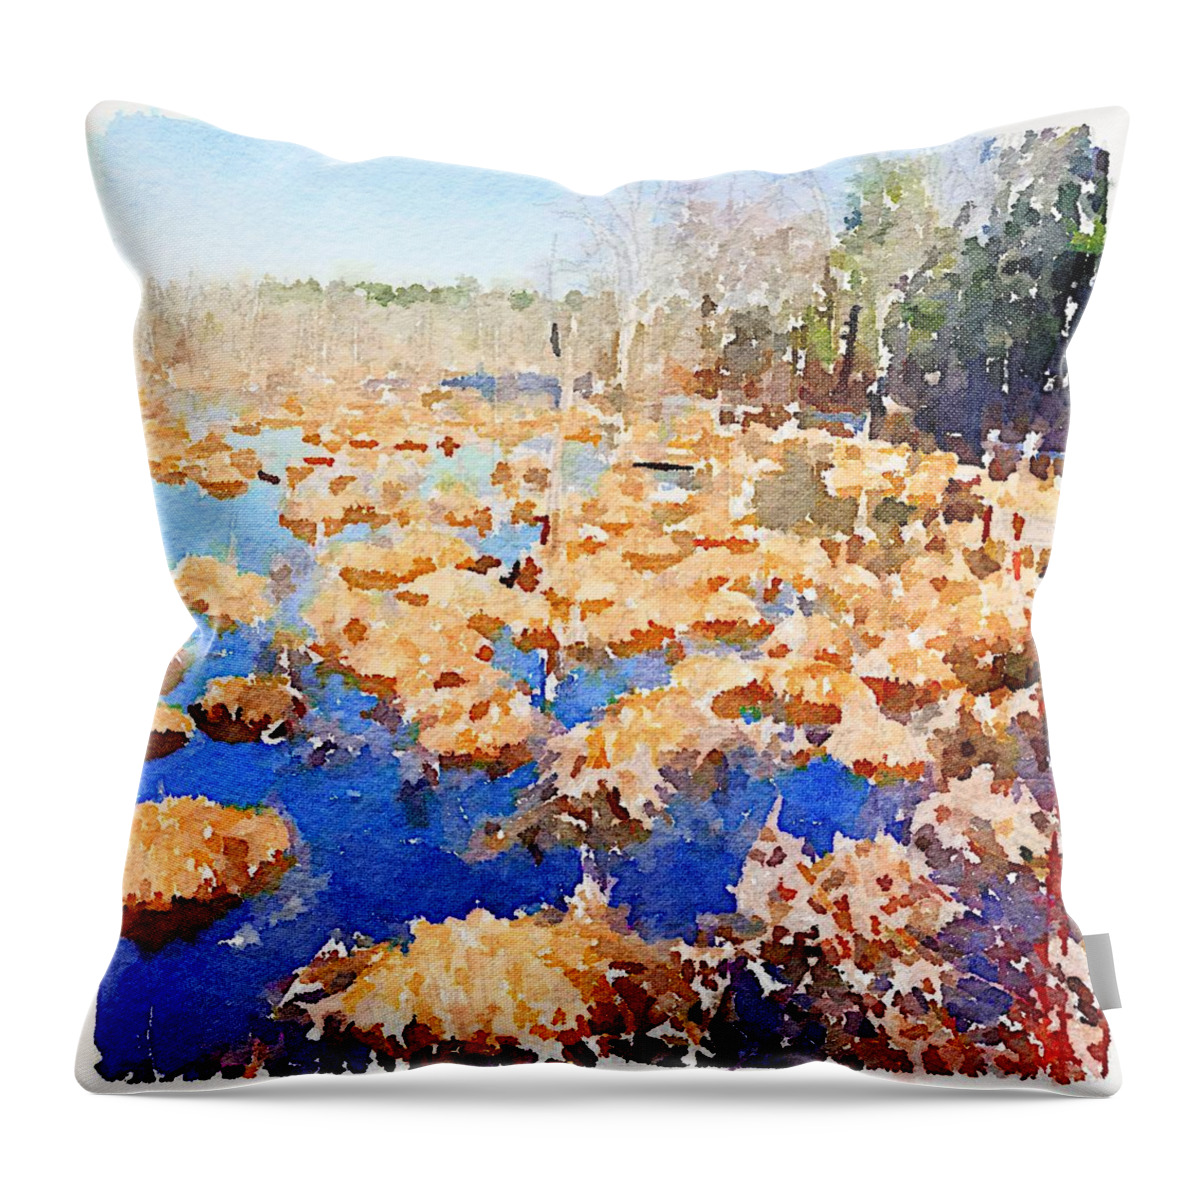 Photoshopped Image Throw Pillow featuring the digital art The swamp in January by Steve Glines